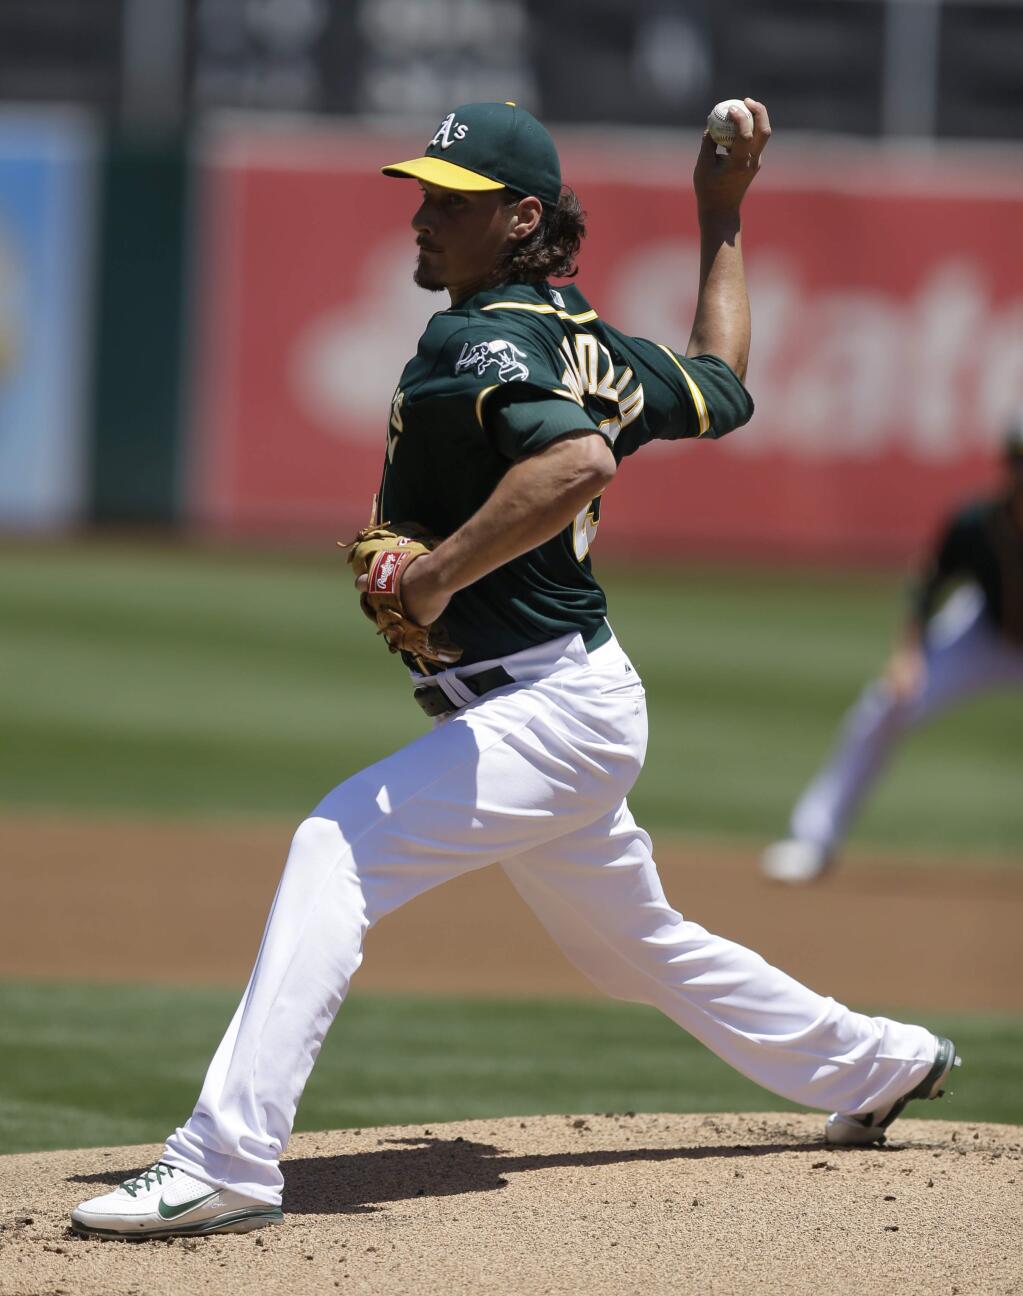 Oakland Athletics' Jeff Samardzija works against the Houston Astros in the first inning of a baseball game Thursday, July 24, 2014, in Oakland, Calif. (AP Photo/Ben Margot)